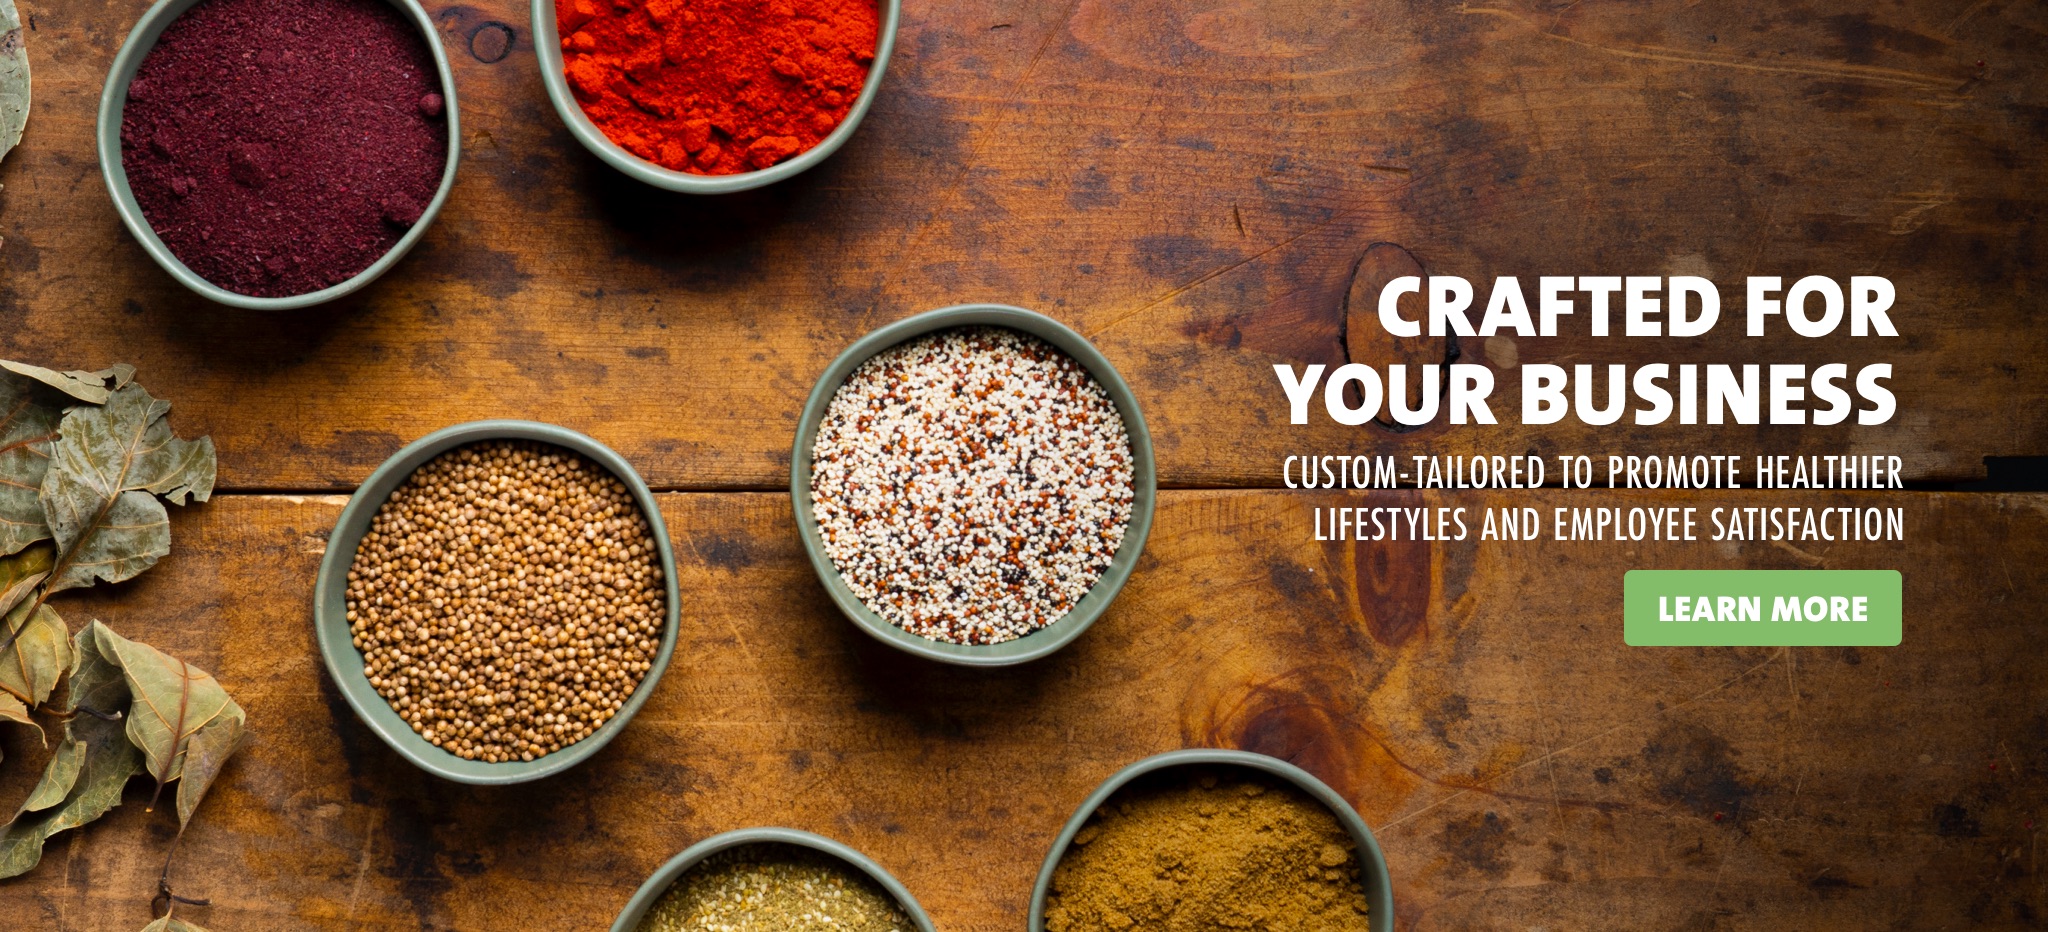 Bowls of spices. Caption: Crafted For Your Business Custom-Tailored To Promote Healthier Lifestyles And Employee Satisfaction